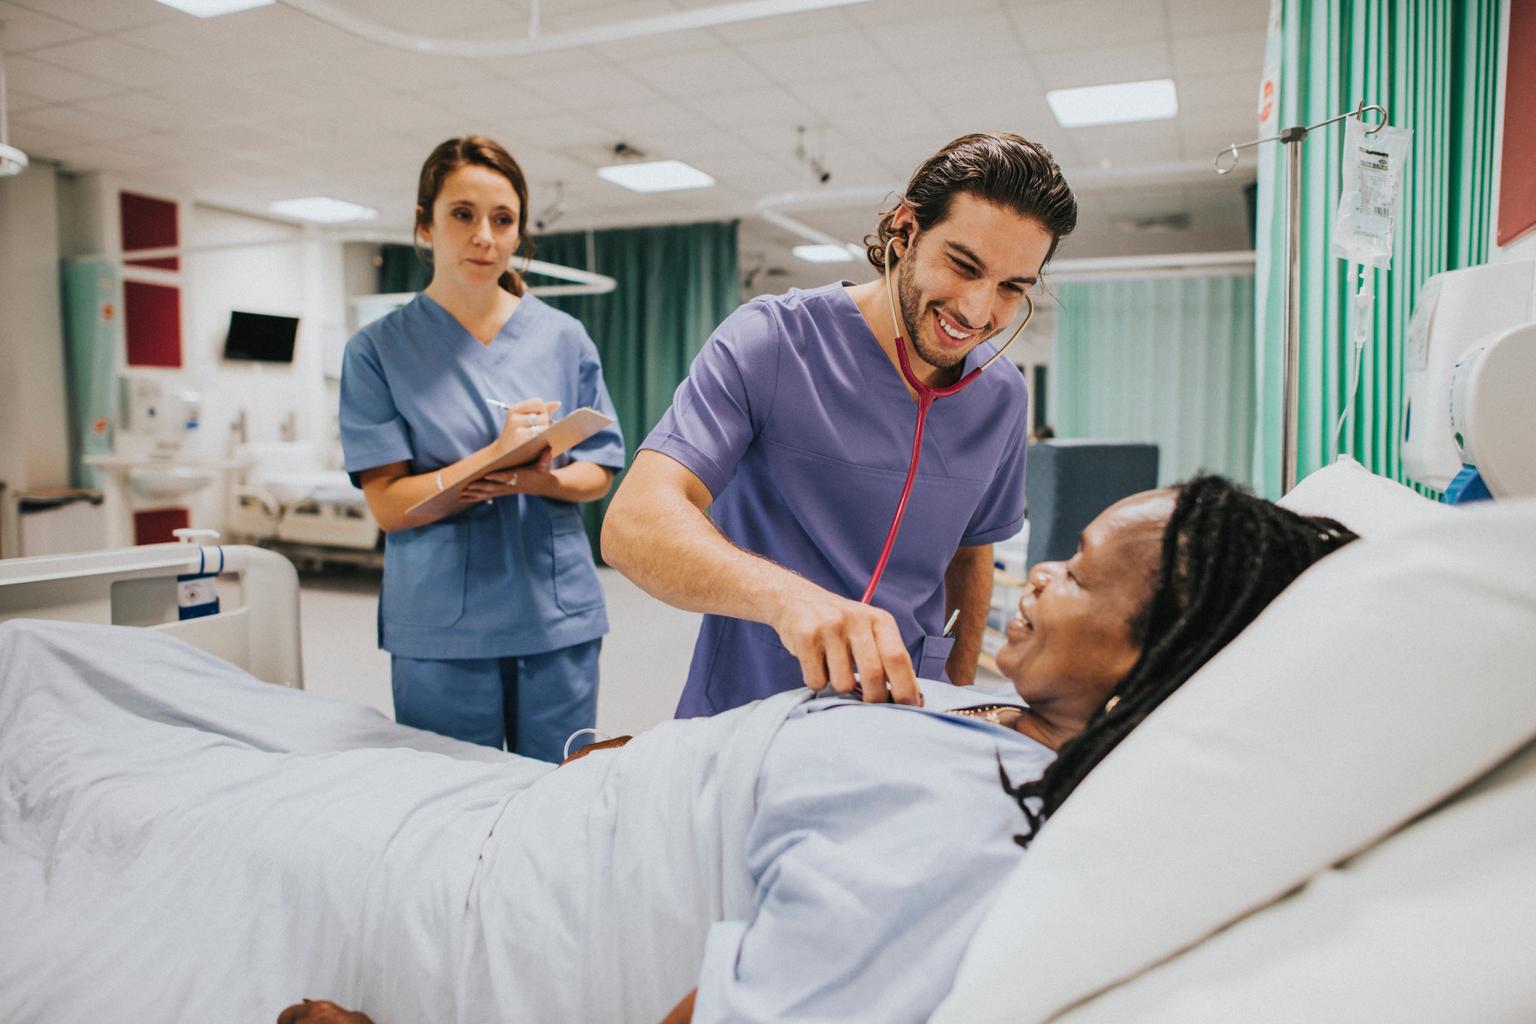  How one CNA Program achieved near-perfect pass rates